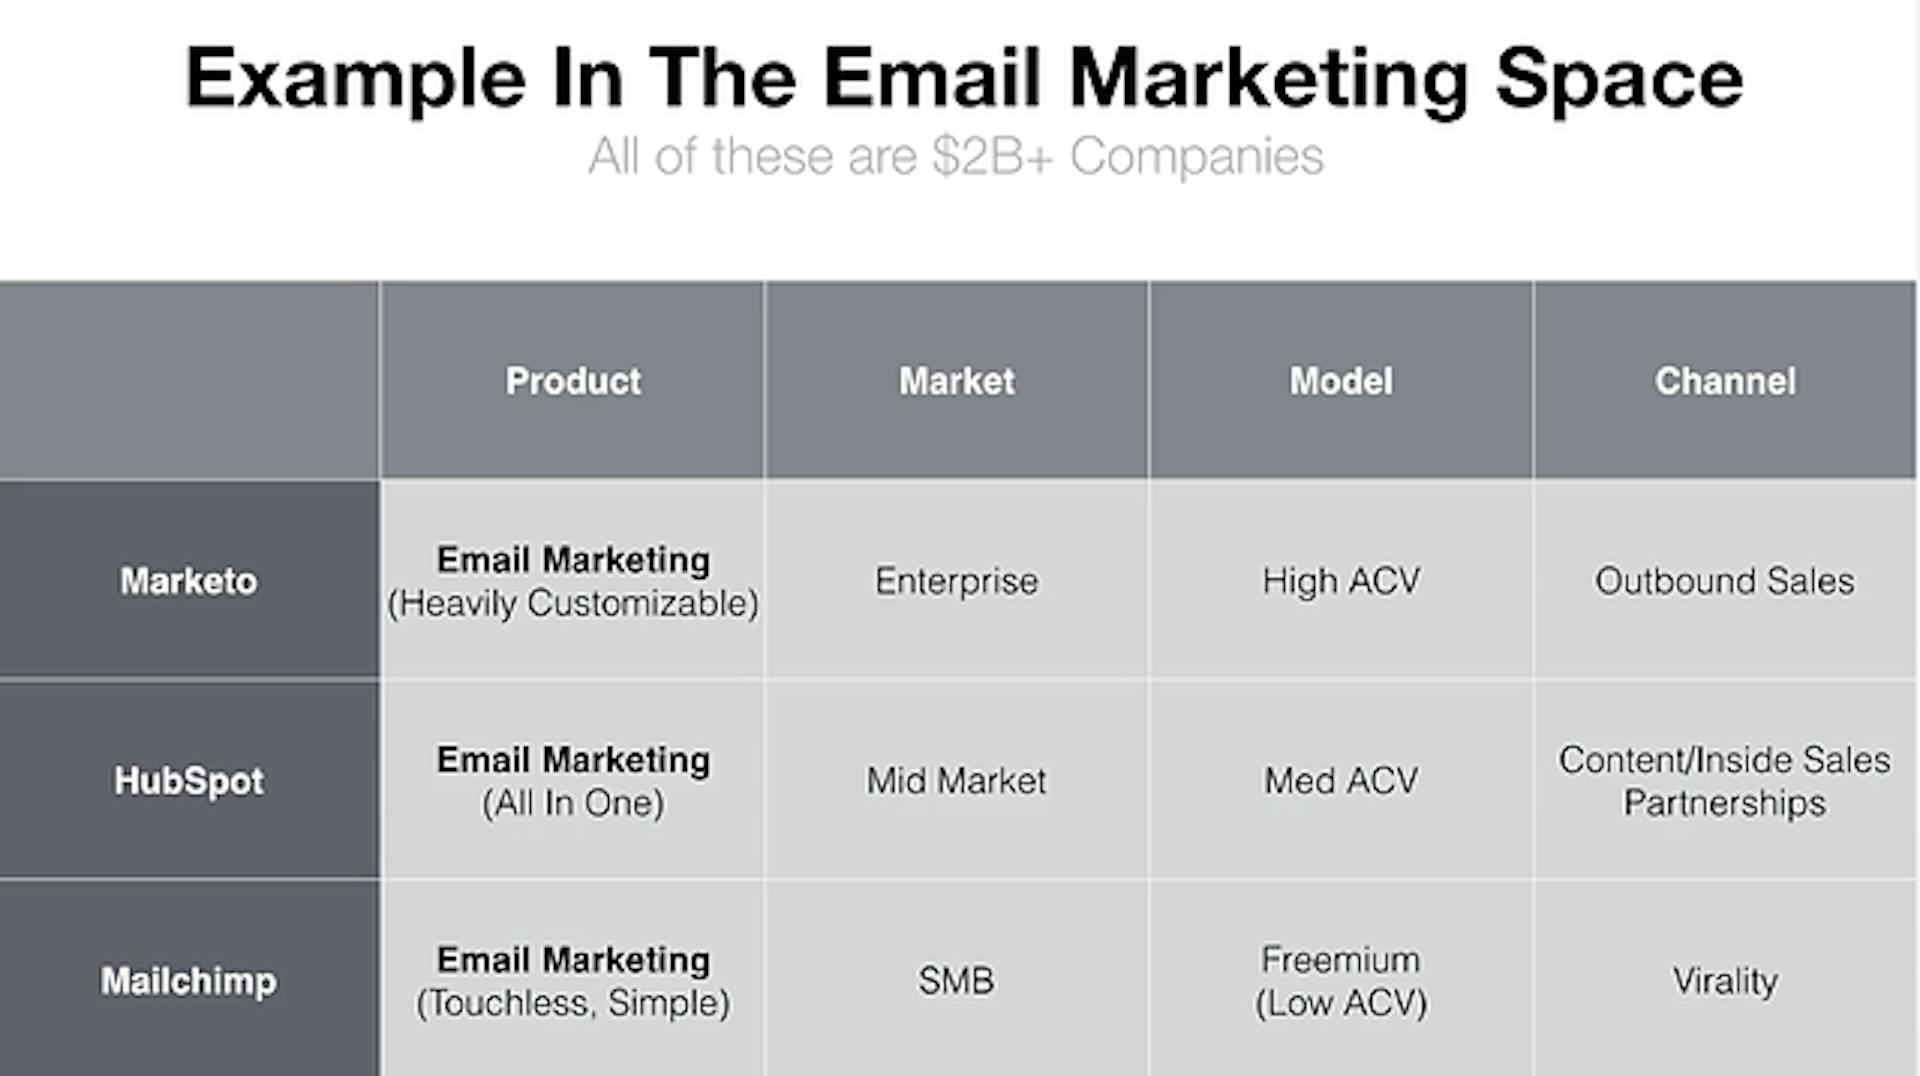 Example in the email marketing space shows Marketo, Hubspot, and Mailchimp's varying approach to product, market, model, and channel.